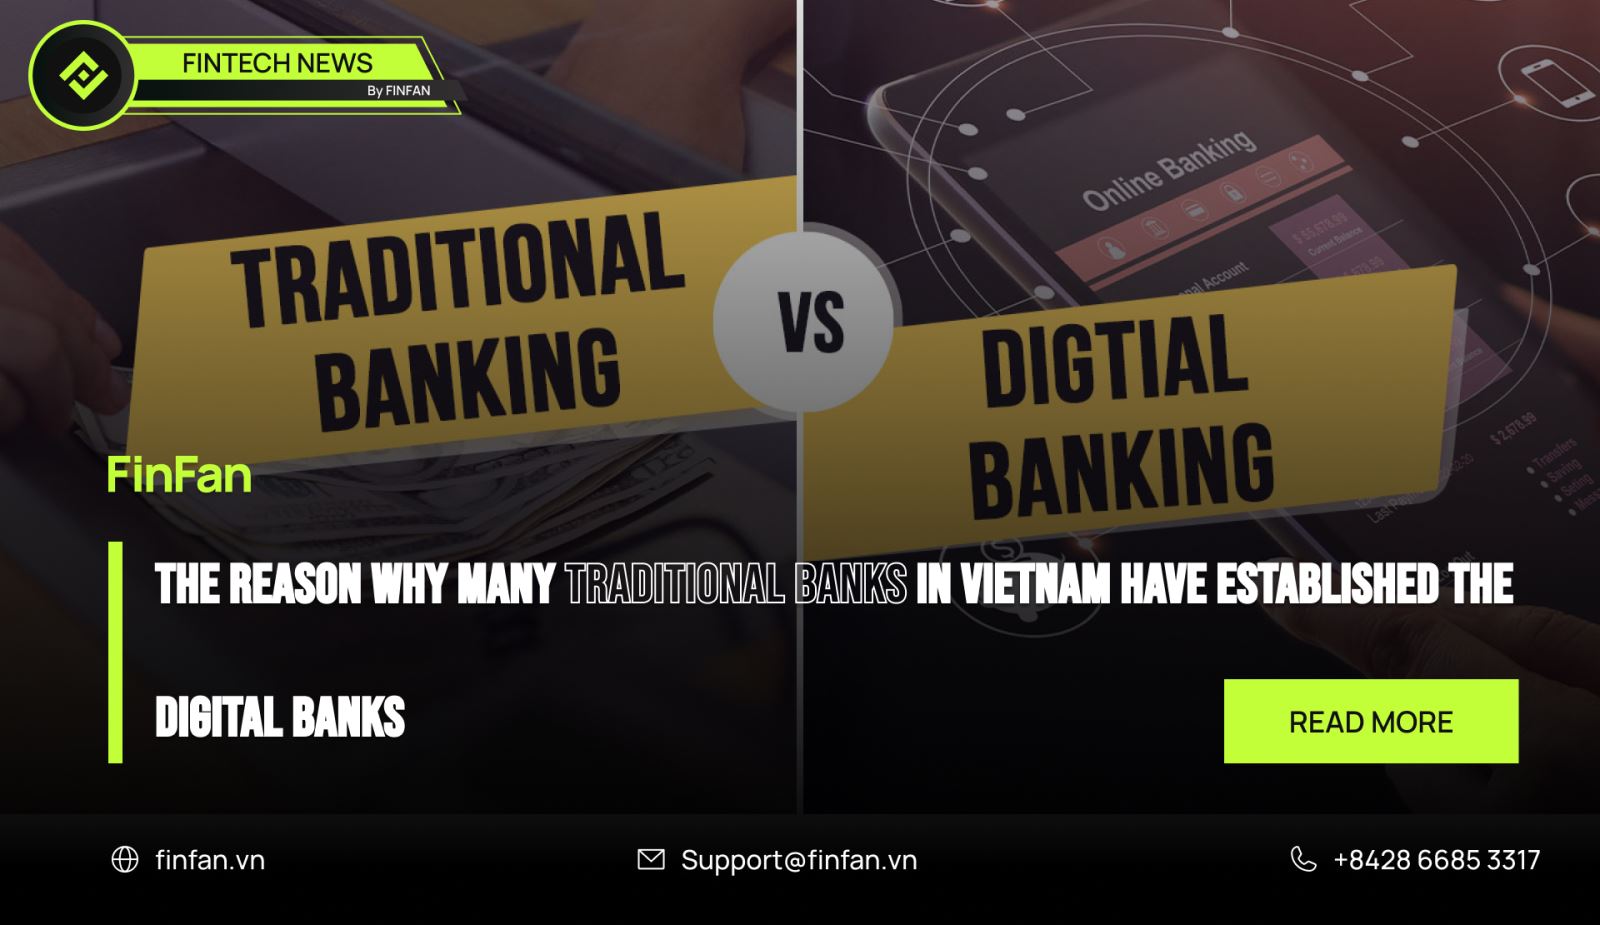 The reason why many traditional banks in Vietnam have established the digital banks